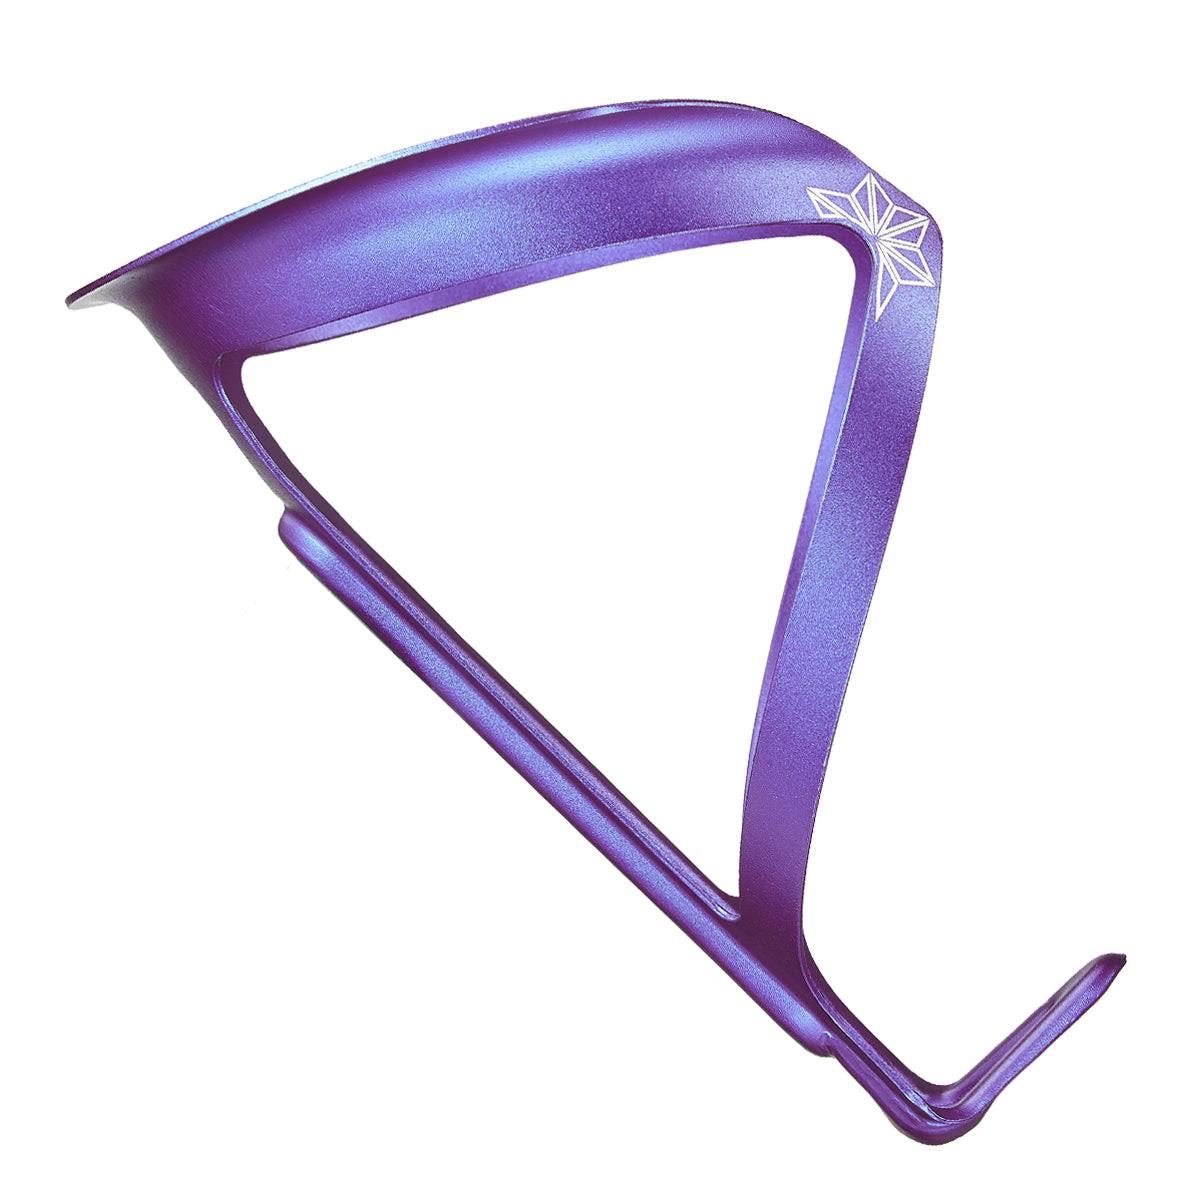 Supacaz Fly Cage - CG49, Anodized